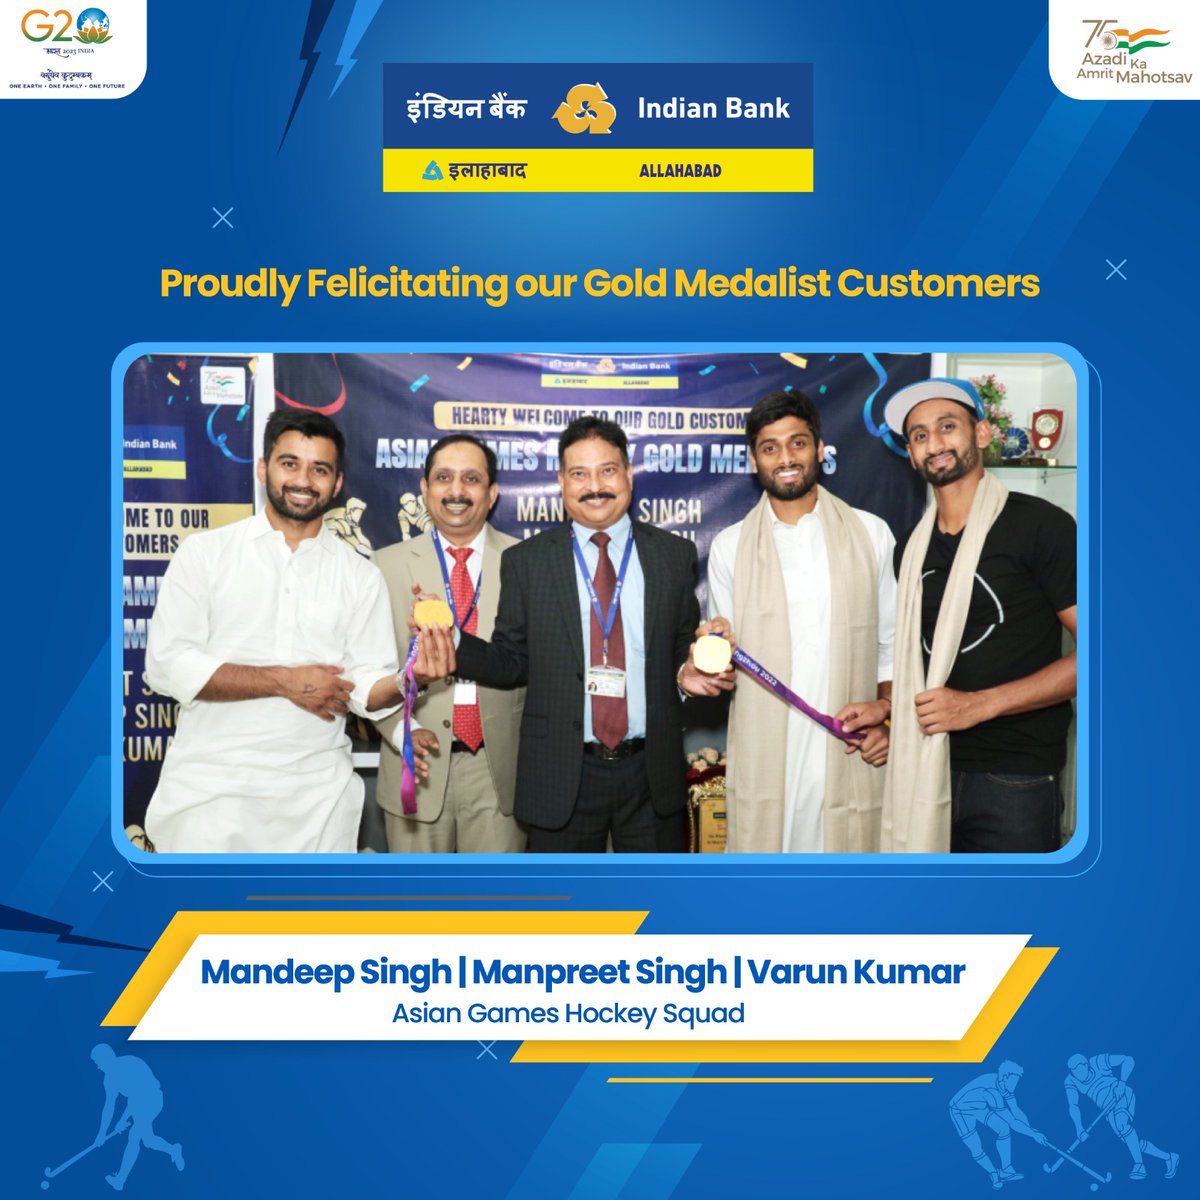 Indian Bank feels proud to have served members of the Asian Games Gold medal winning Hockey squad. Our team headed by FGM Chandigarh Shri B.K Sarangi conveyed greetings to Shri Mandeep Singh, Shri Manpreet Singh and Shri Varun Kumar for the part they played for the country.